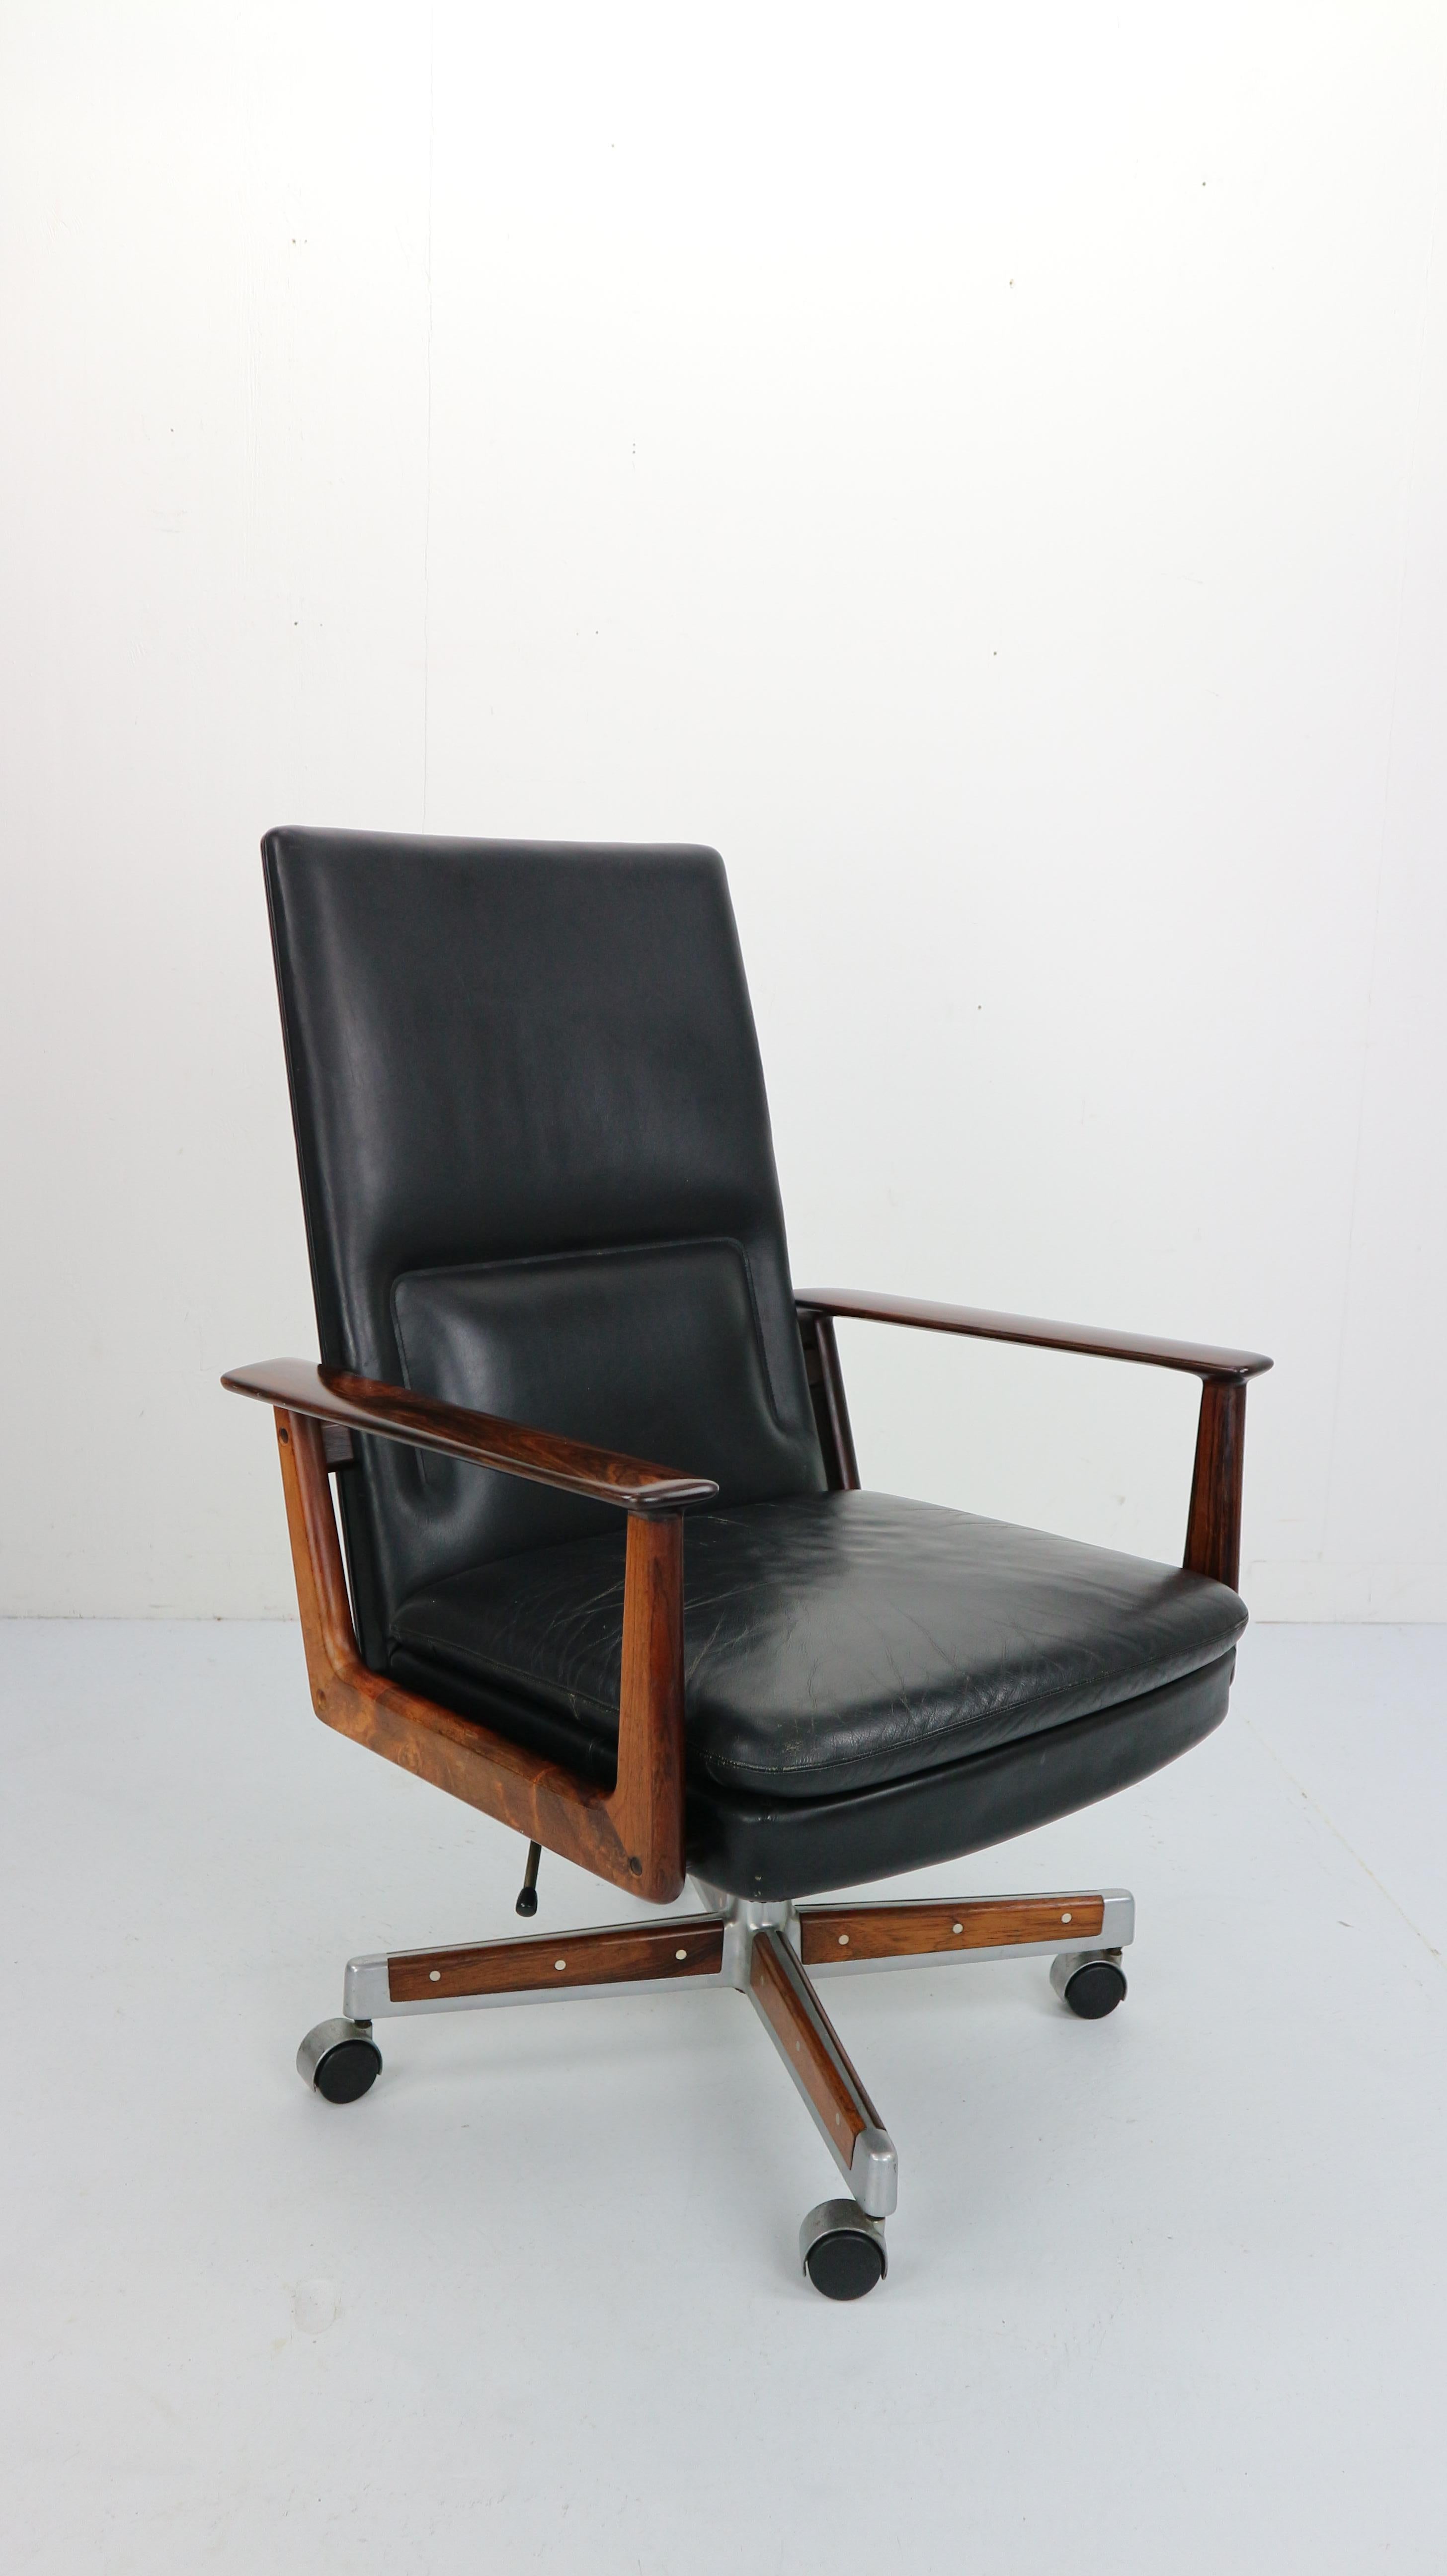 President desk chair model- 419 designed by Arne Vodder and manufactured by Sibast Mobler, Denmark, 1960.
This Danish design exclusive chair has sculptured rosewood armrests, the aluminum base with rosewood inlay and the black leather seating makes